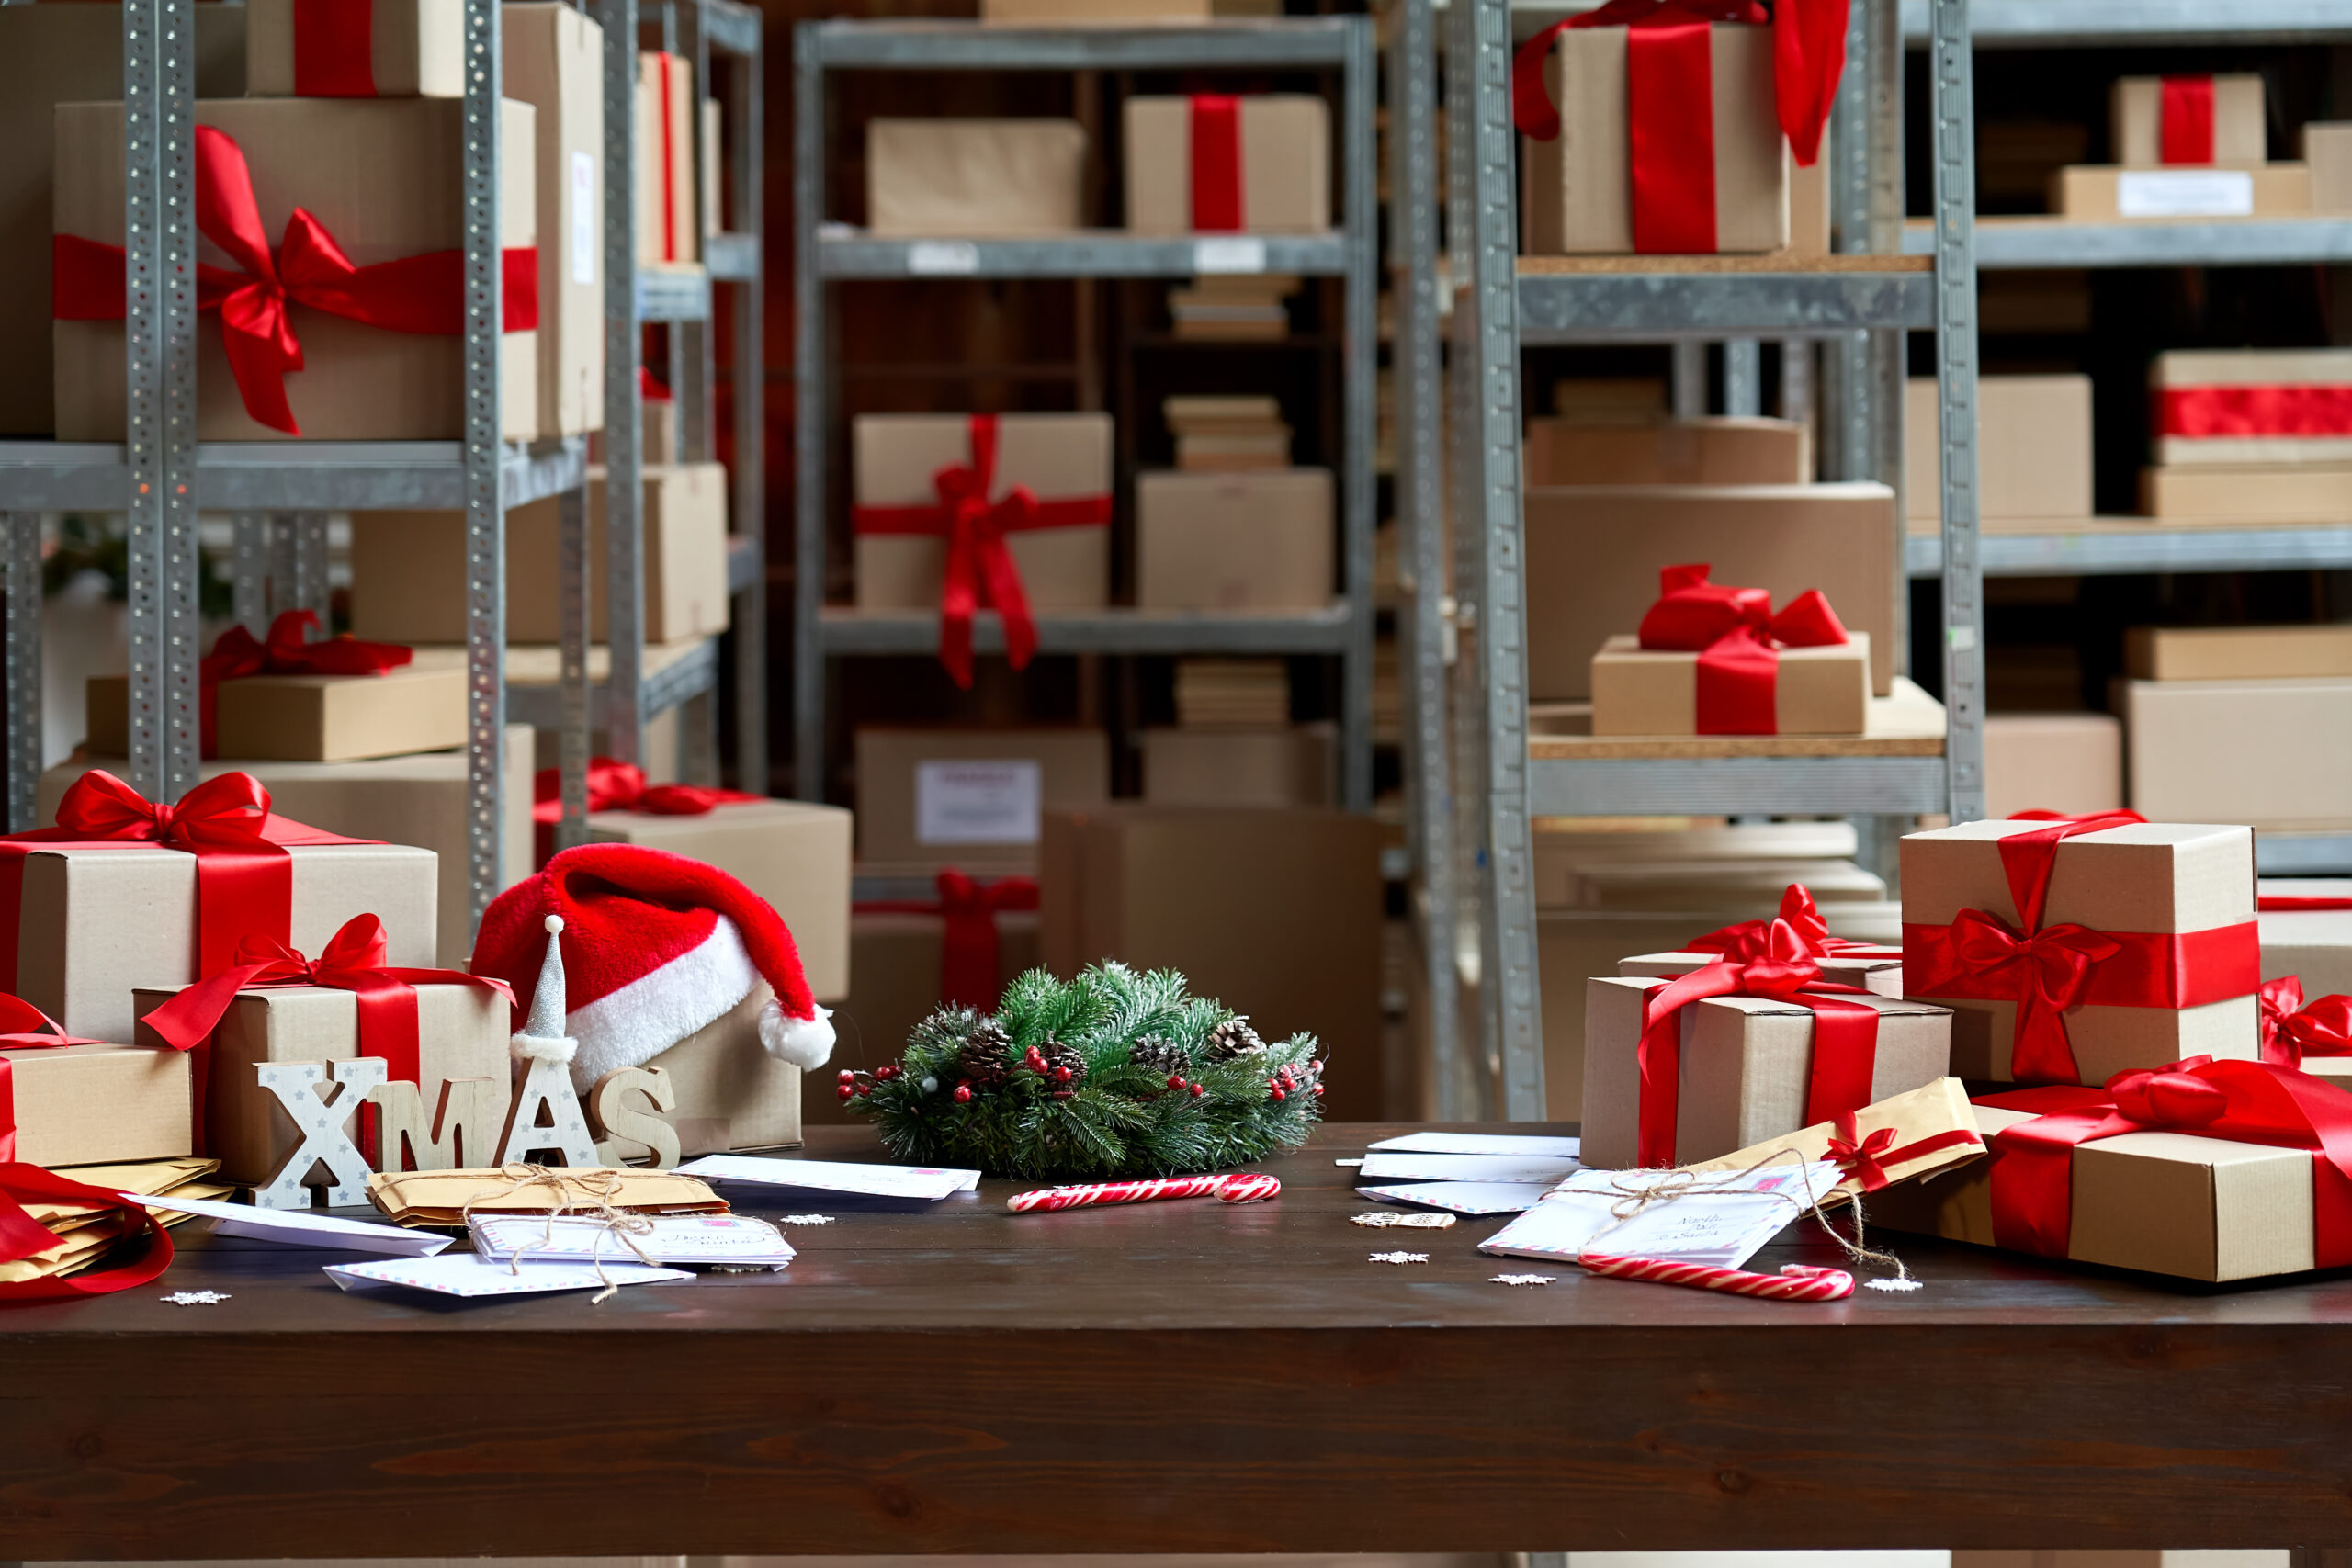 Decorated,Merry,Christmas,Table,With,Gifts,Boxes,In,Warehouse,Interior